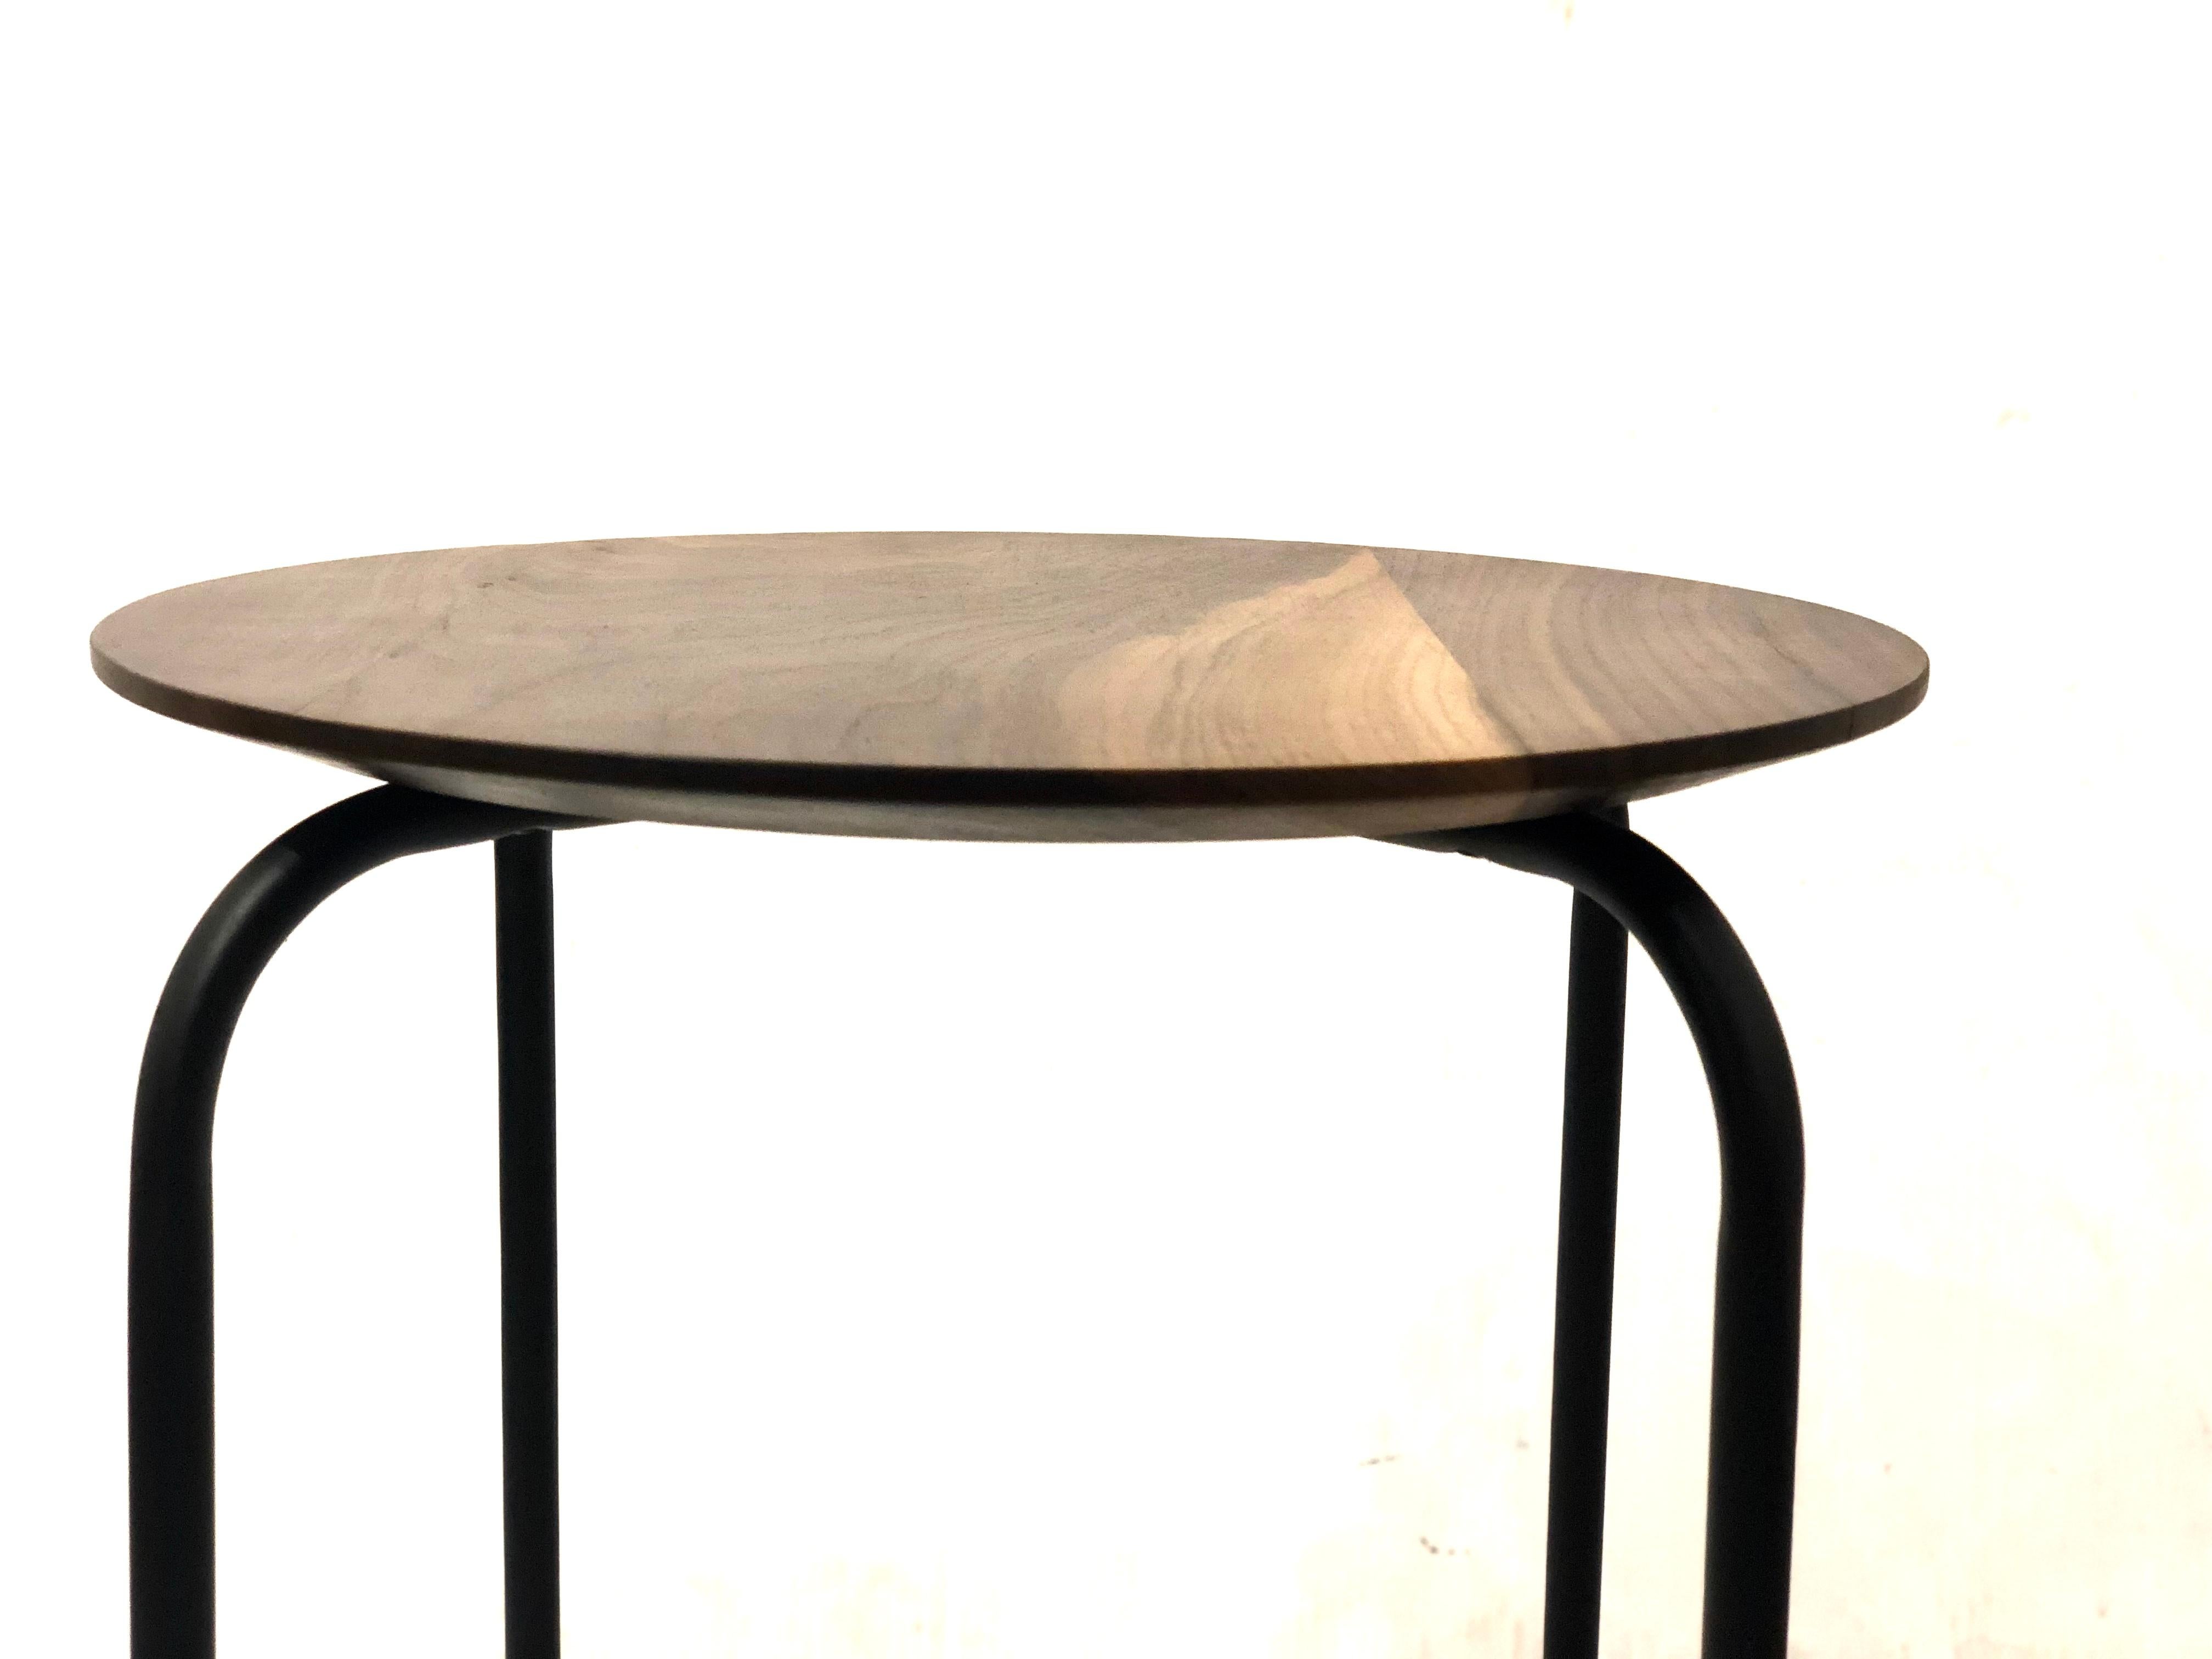 20th Century American Black Walnut Cocktail Table or Stool with Black Metal Base